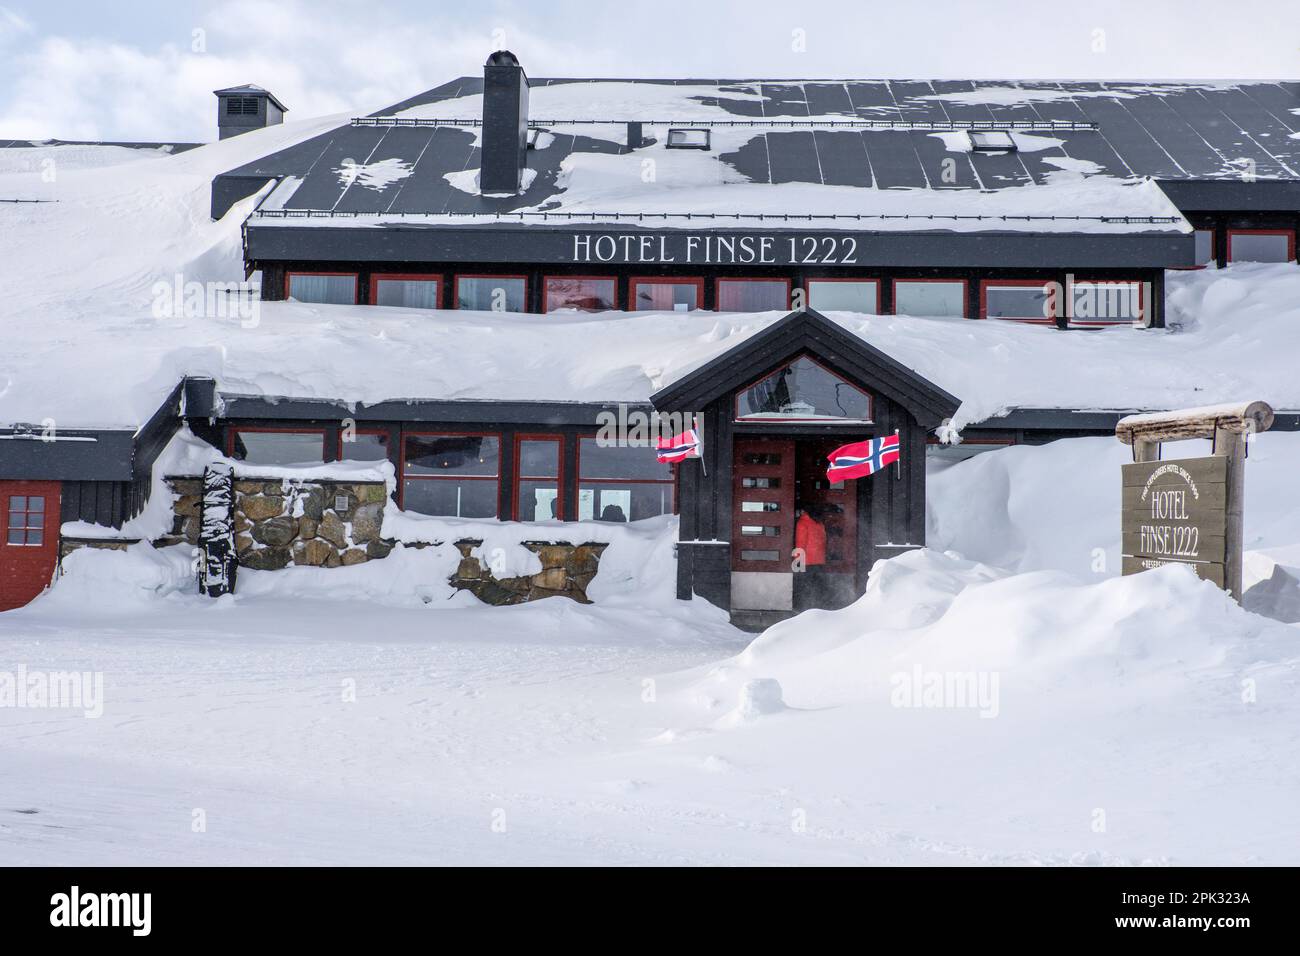 Finse Hotel in winter. Finse is a railway station on the Oslo to Bergen line, high on the Hardanger plateau in Norway Stock Photo